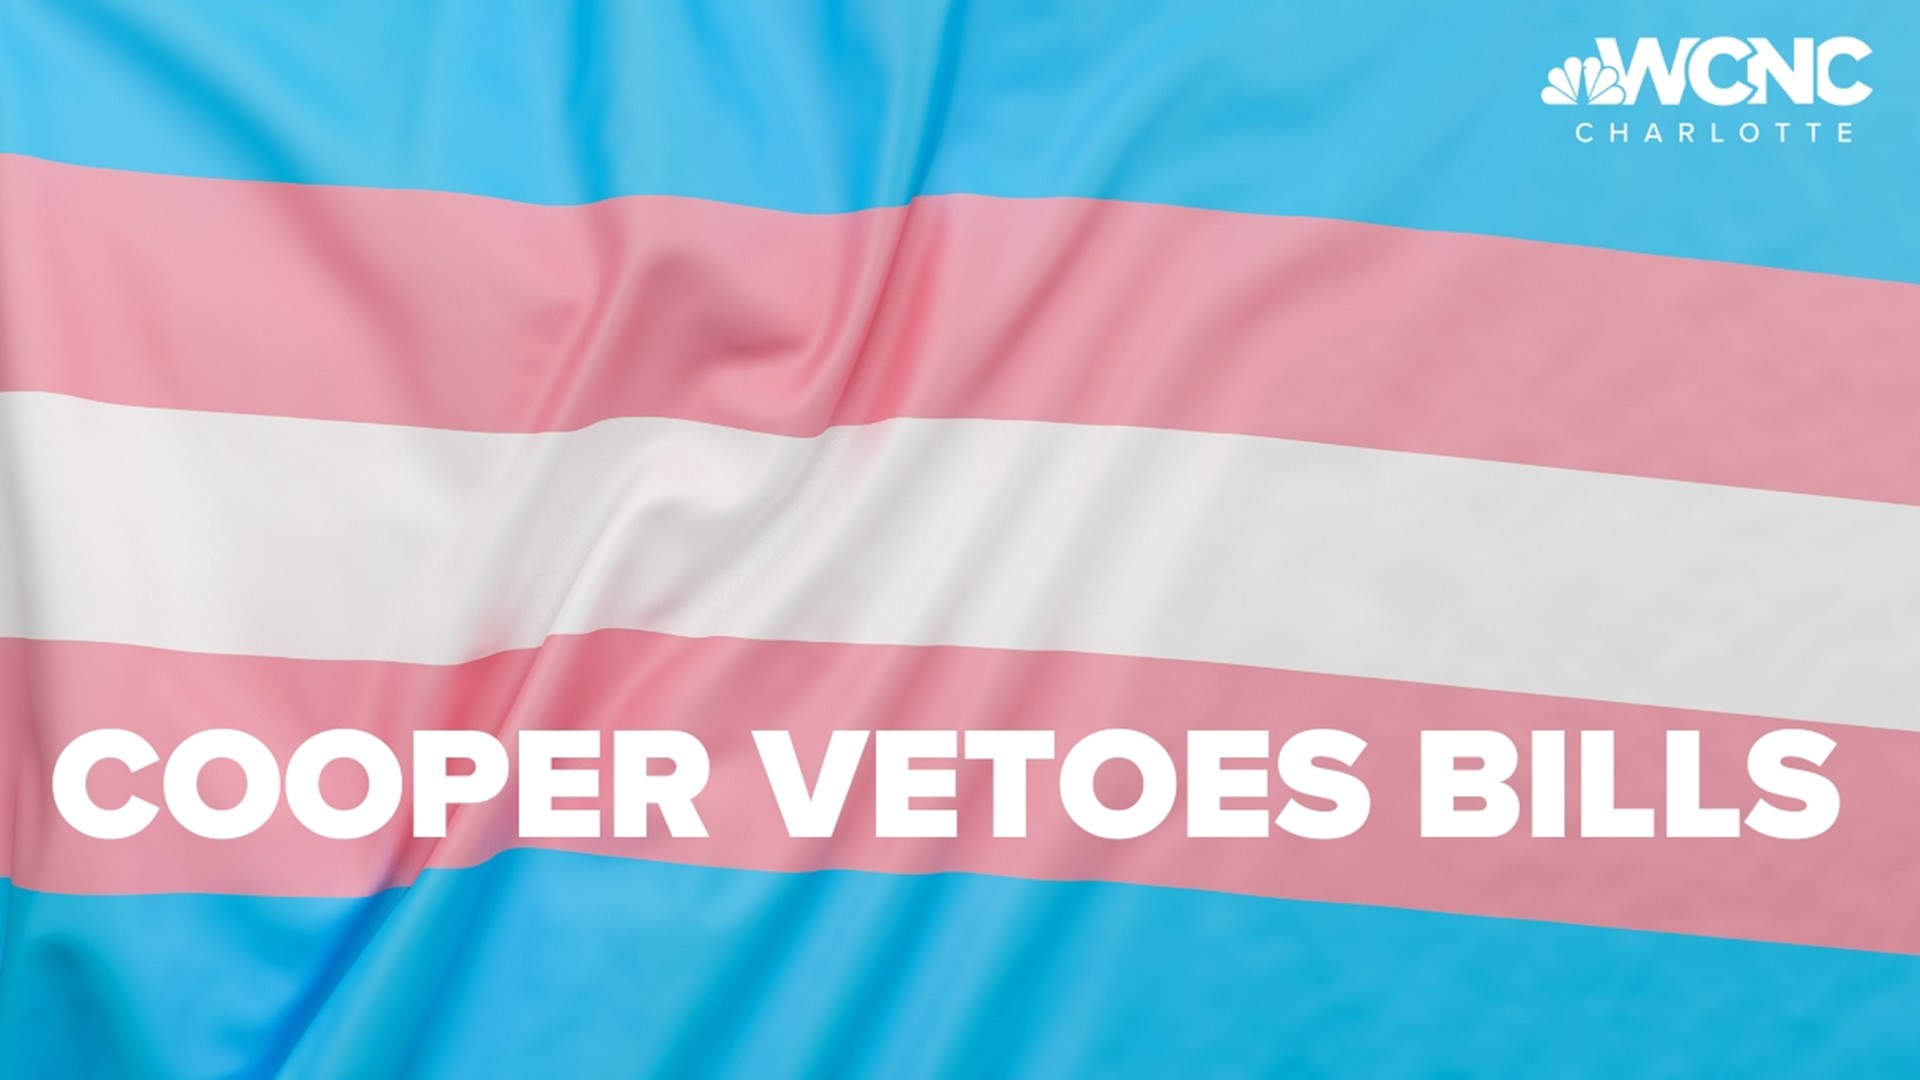 Governor Cooper vetoed three bills that target the rights of transgender individuals after they were passed by the State's Legislature.